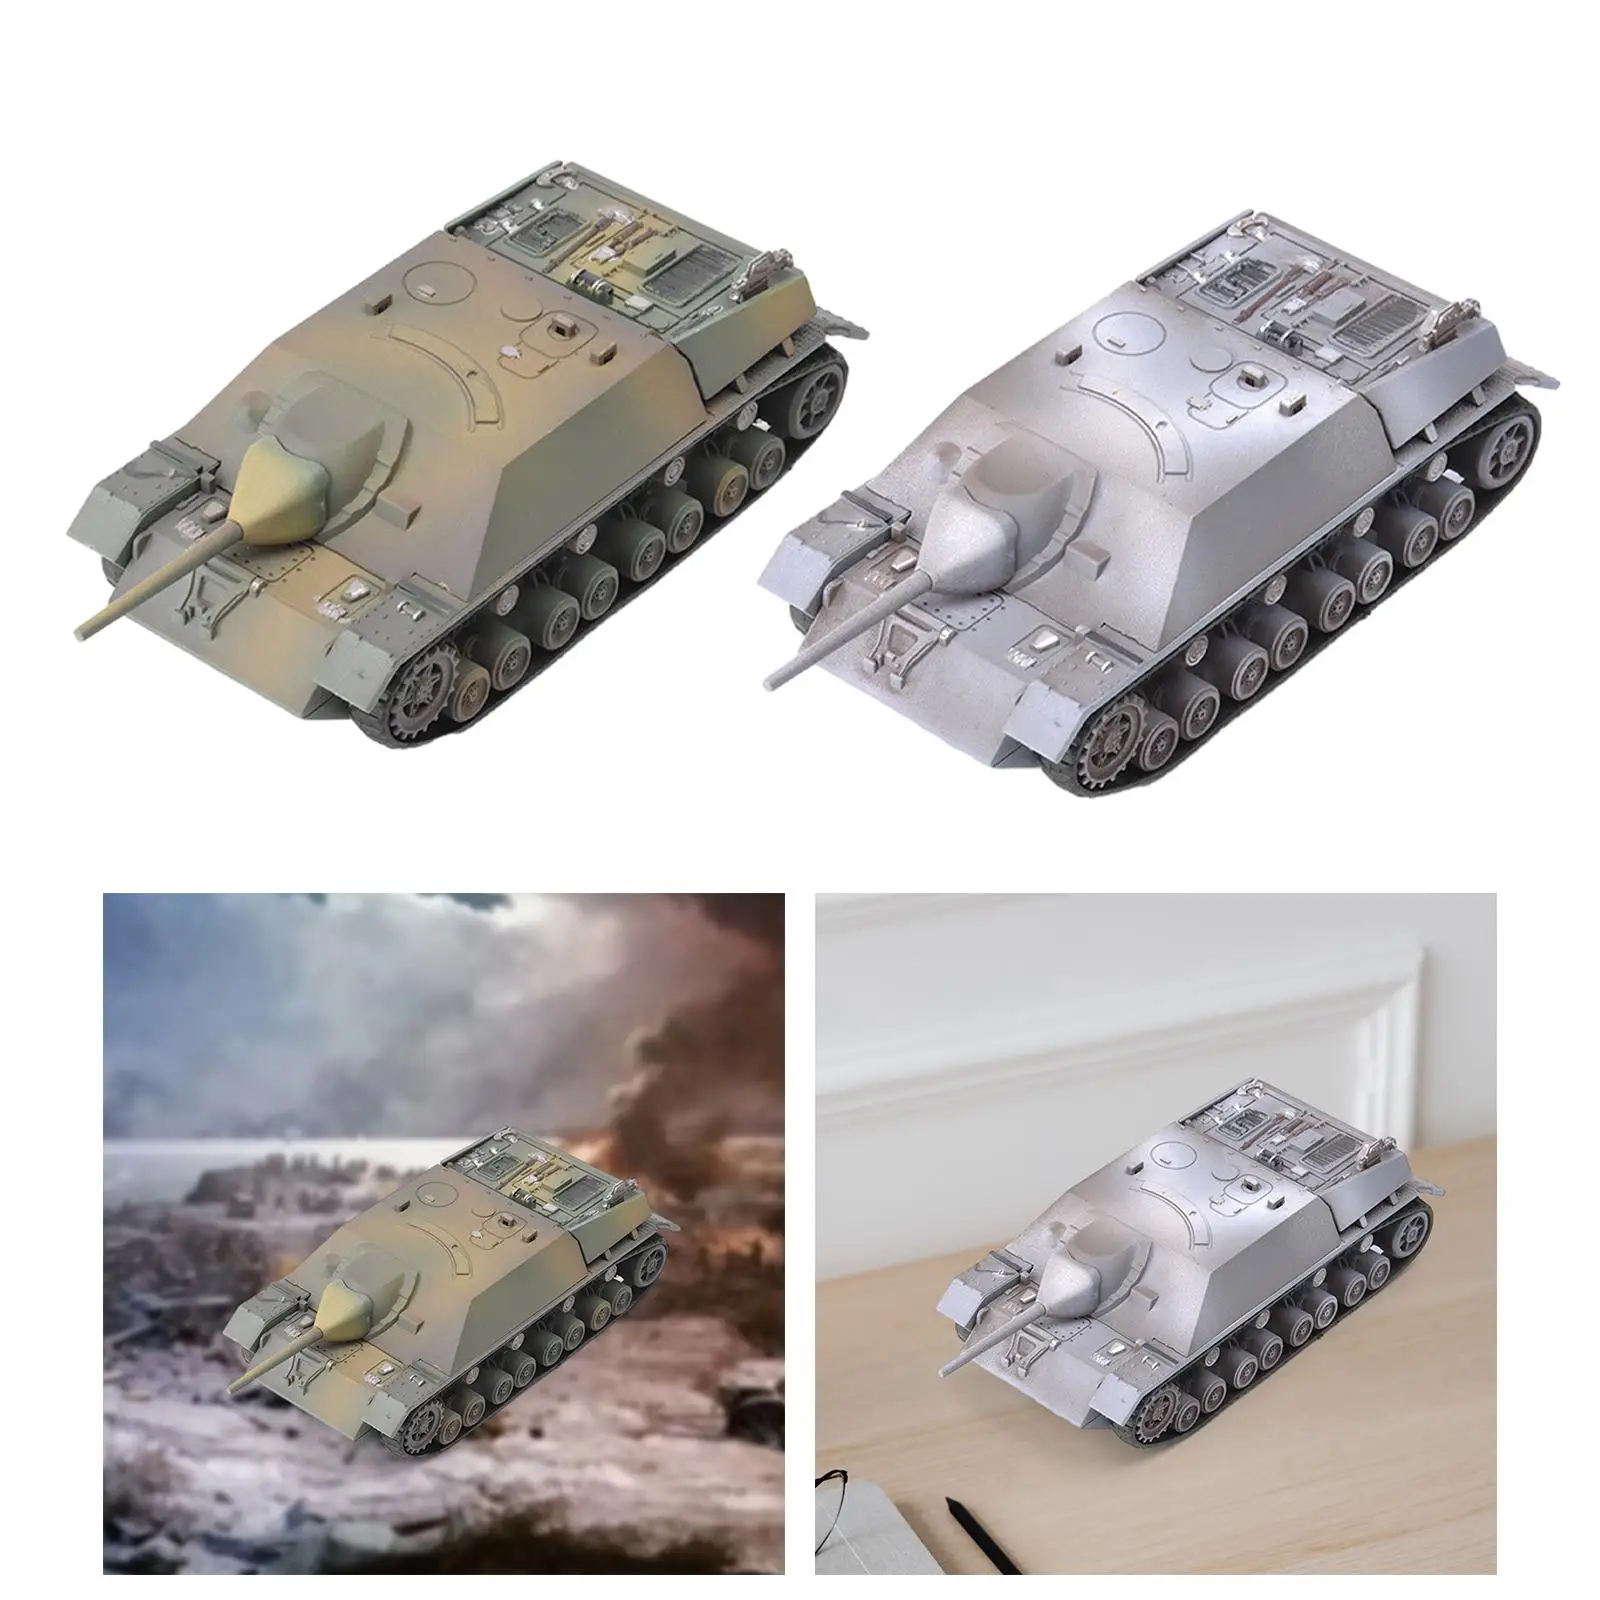 1:72 Scale Tank Model Kits DIY Assemble Table Scene Vehicle Tank Model Toy Collection for Boy Adults Kids Children Birthday Gift